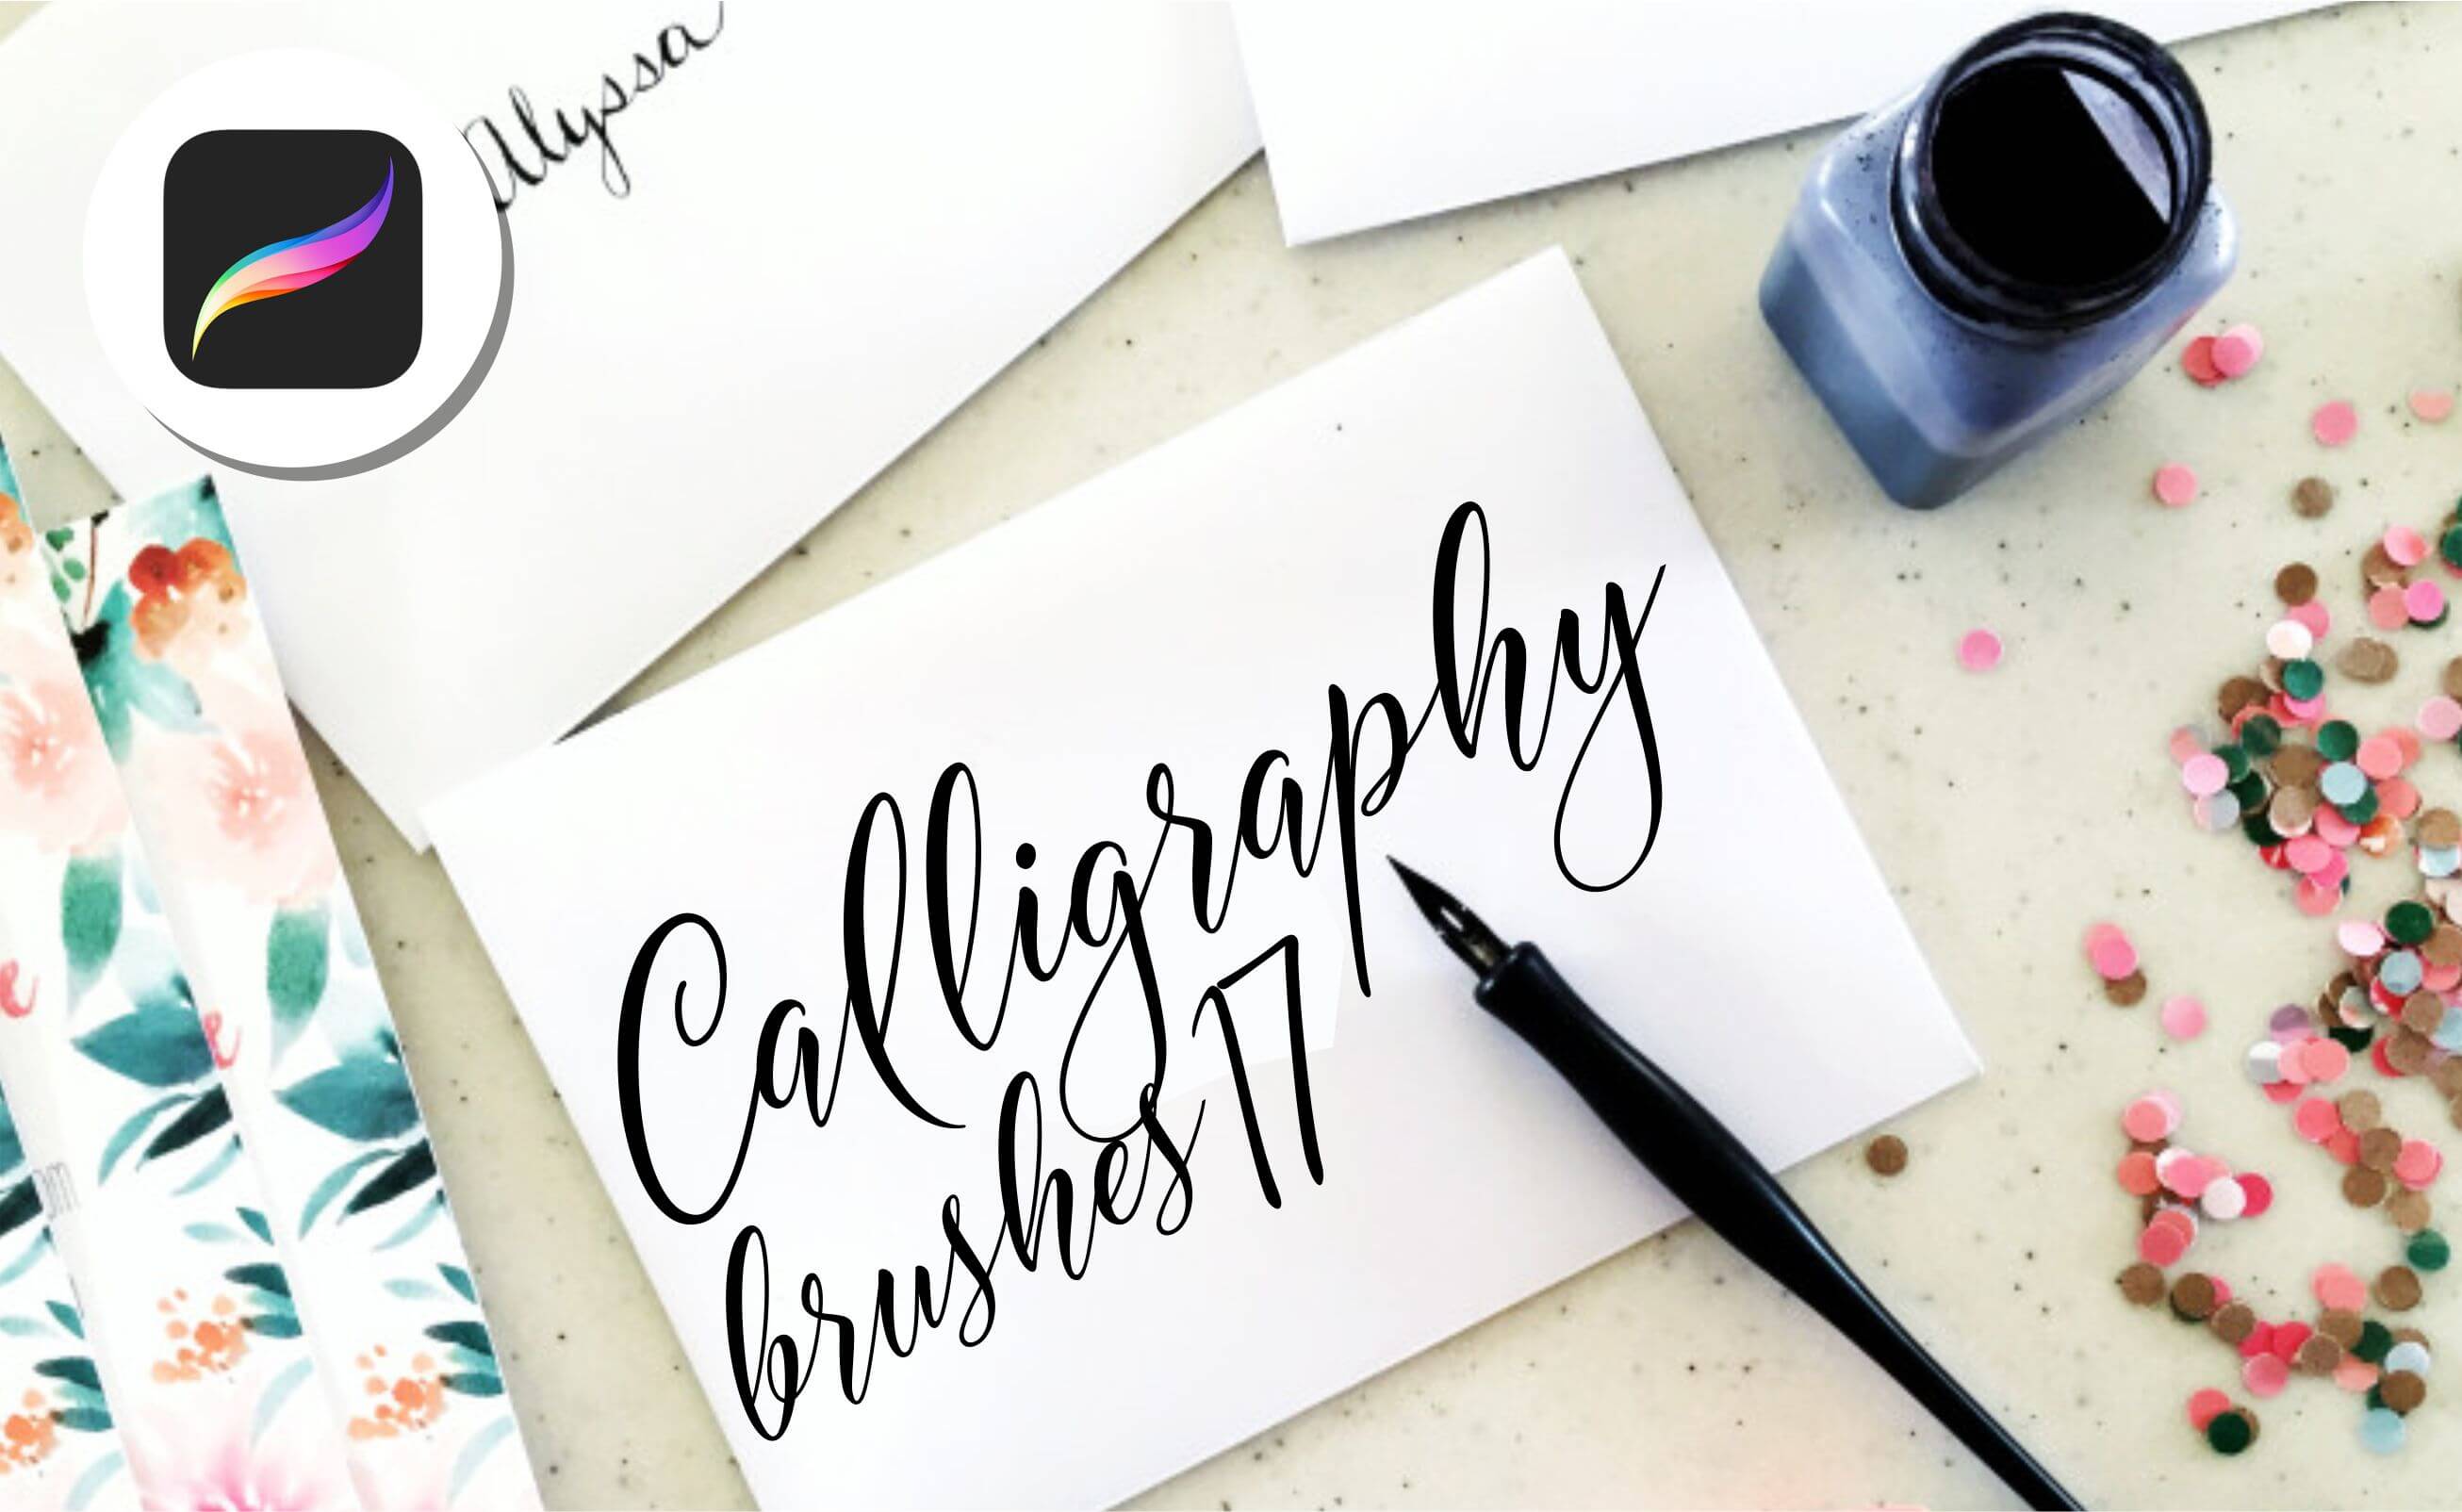 17 beautiful calligraphy brushes for procreate - Free Brushes for Procreate